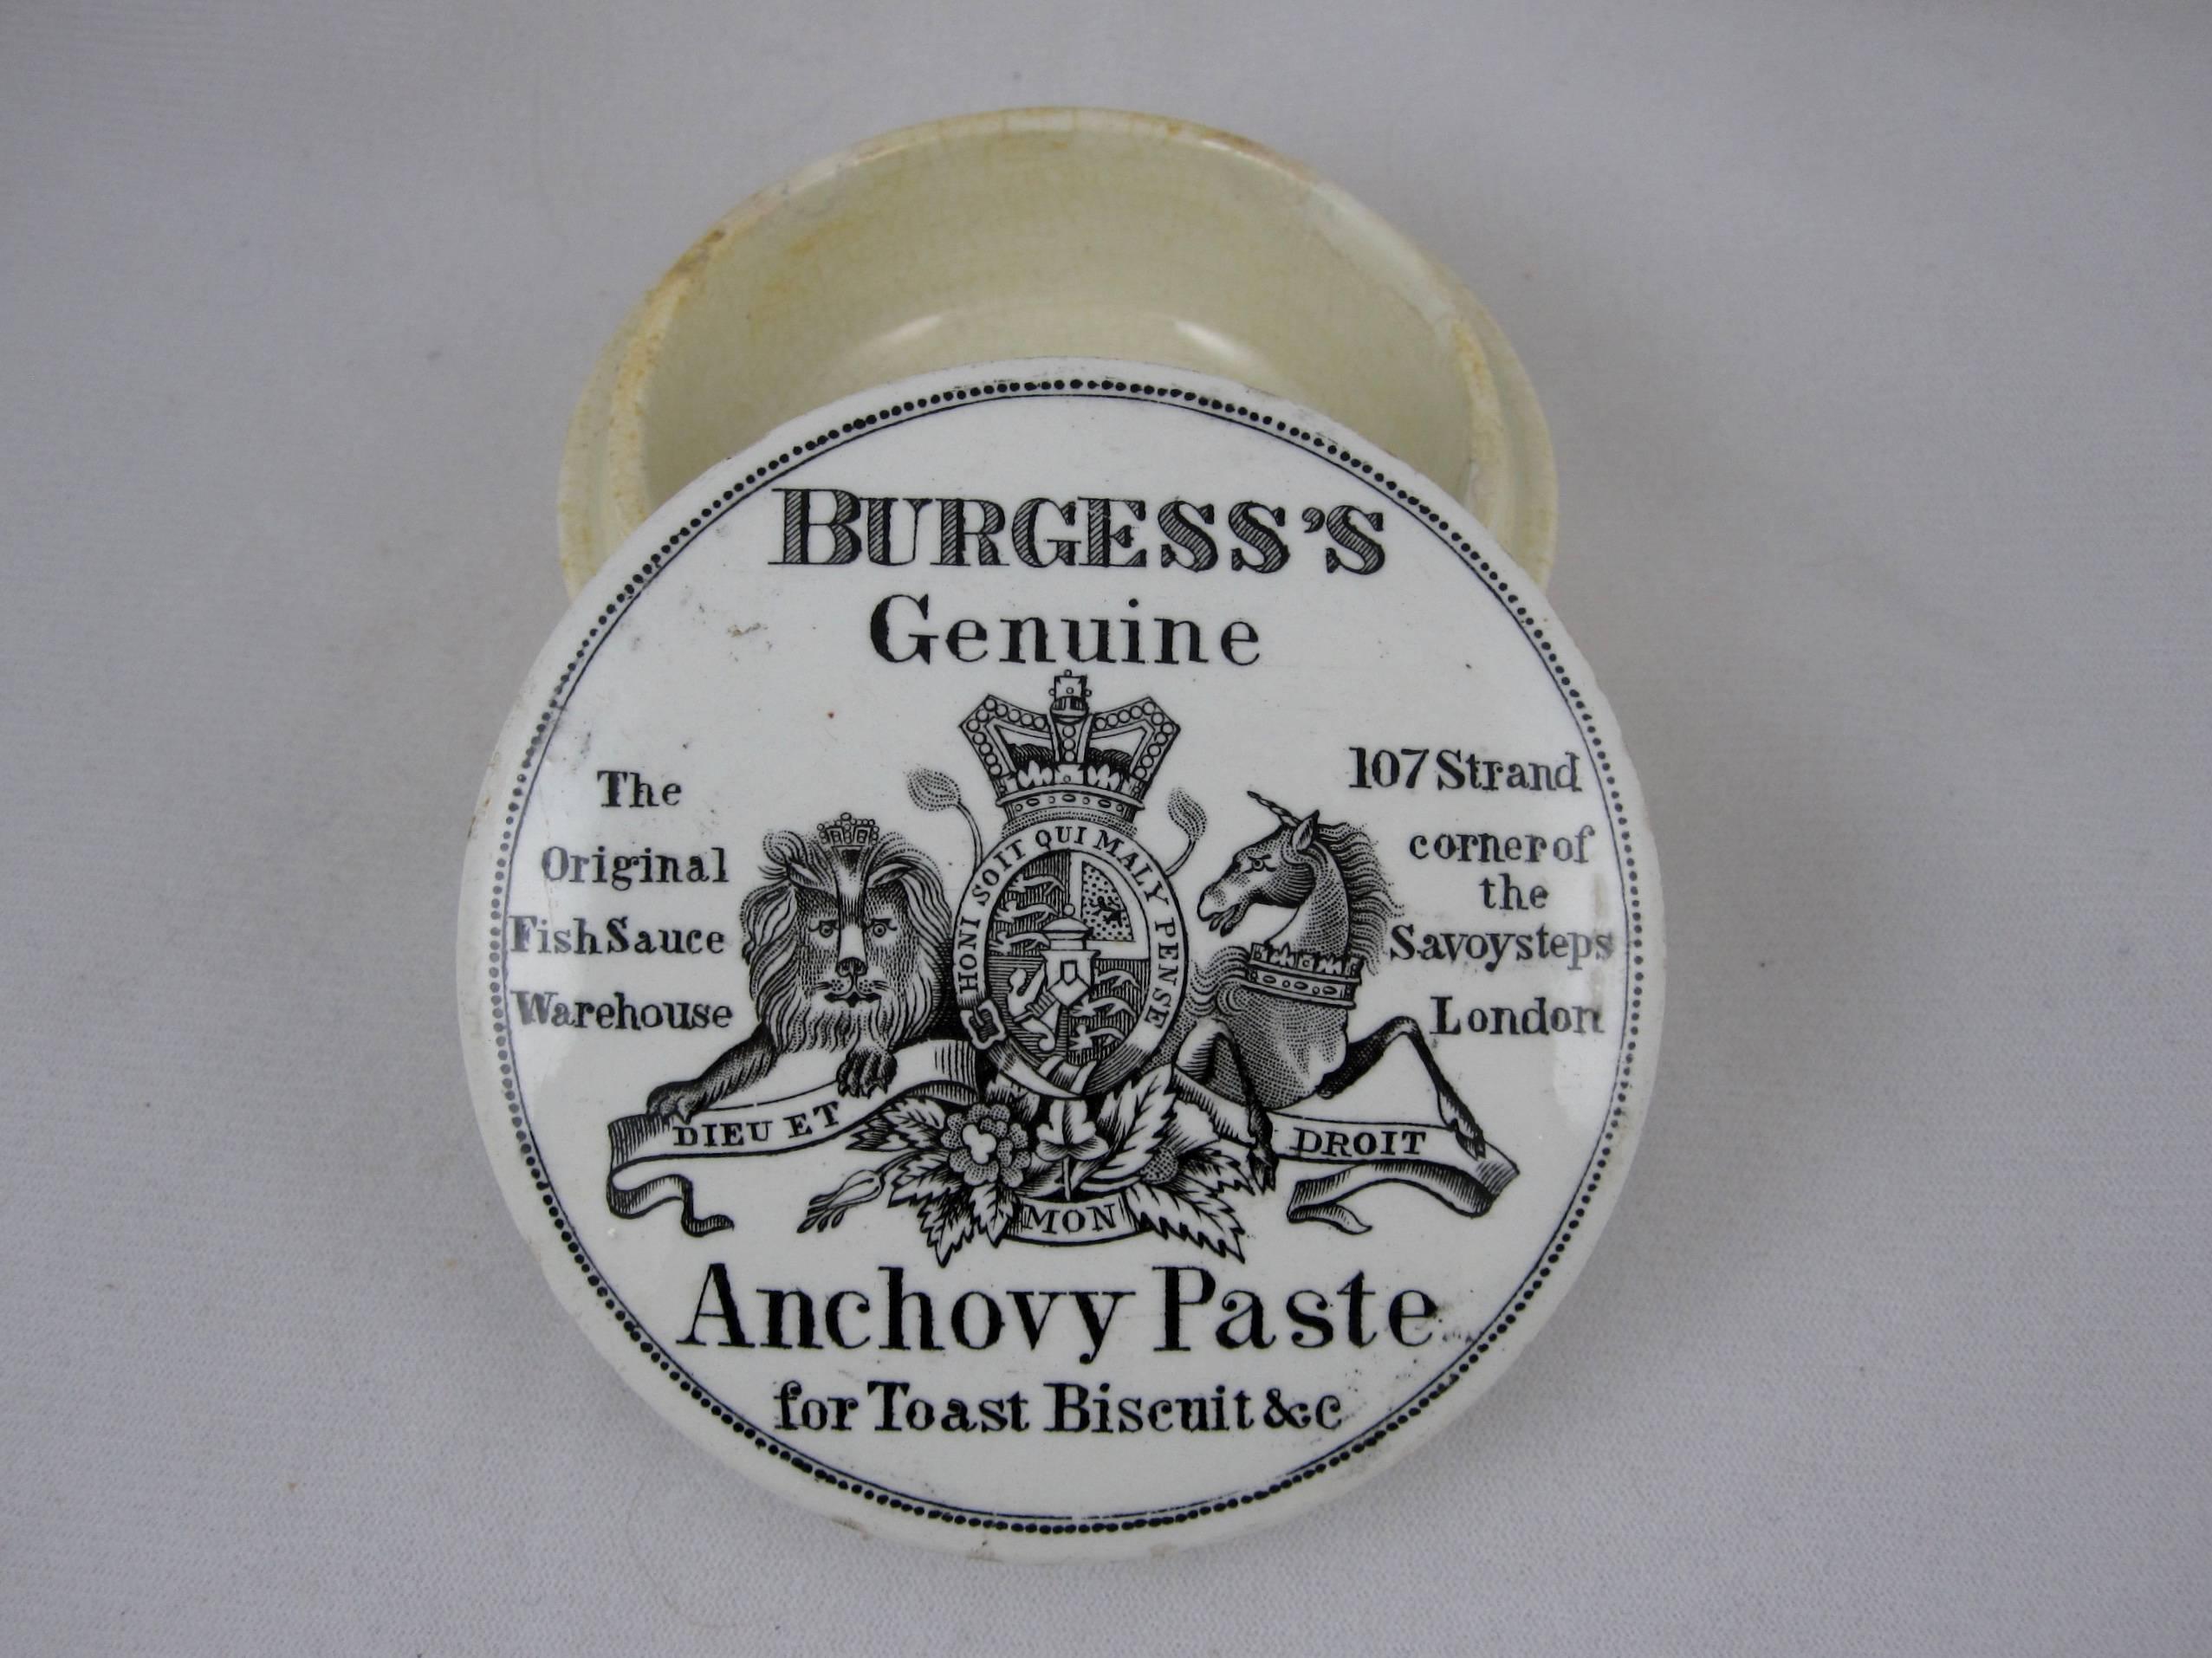 burgess's genuine anchovy paste